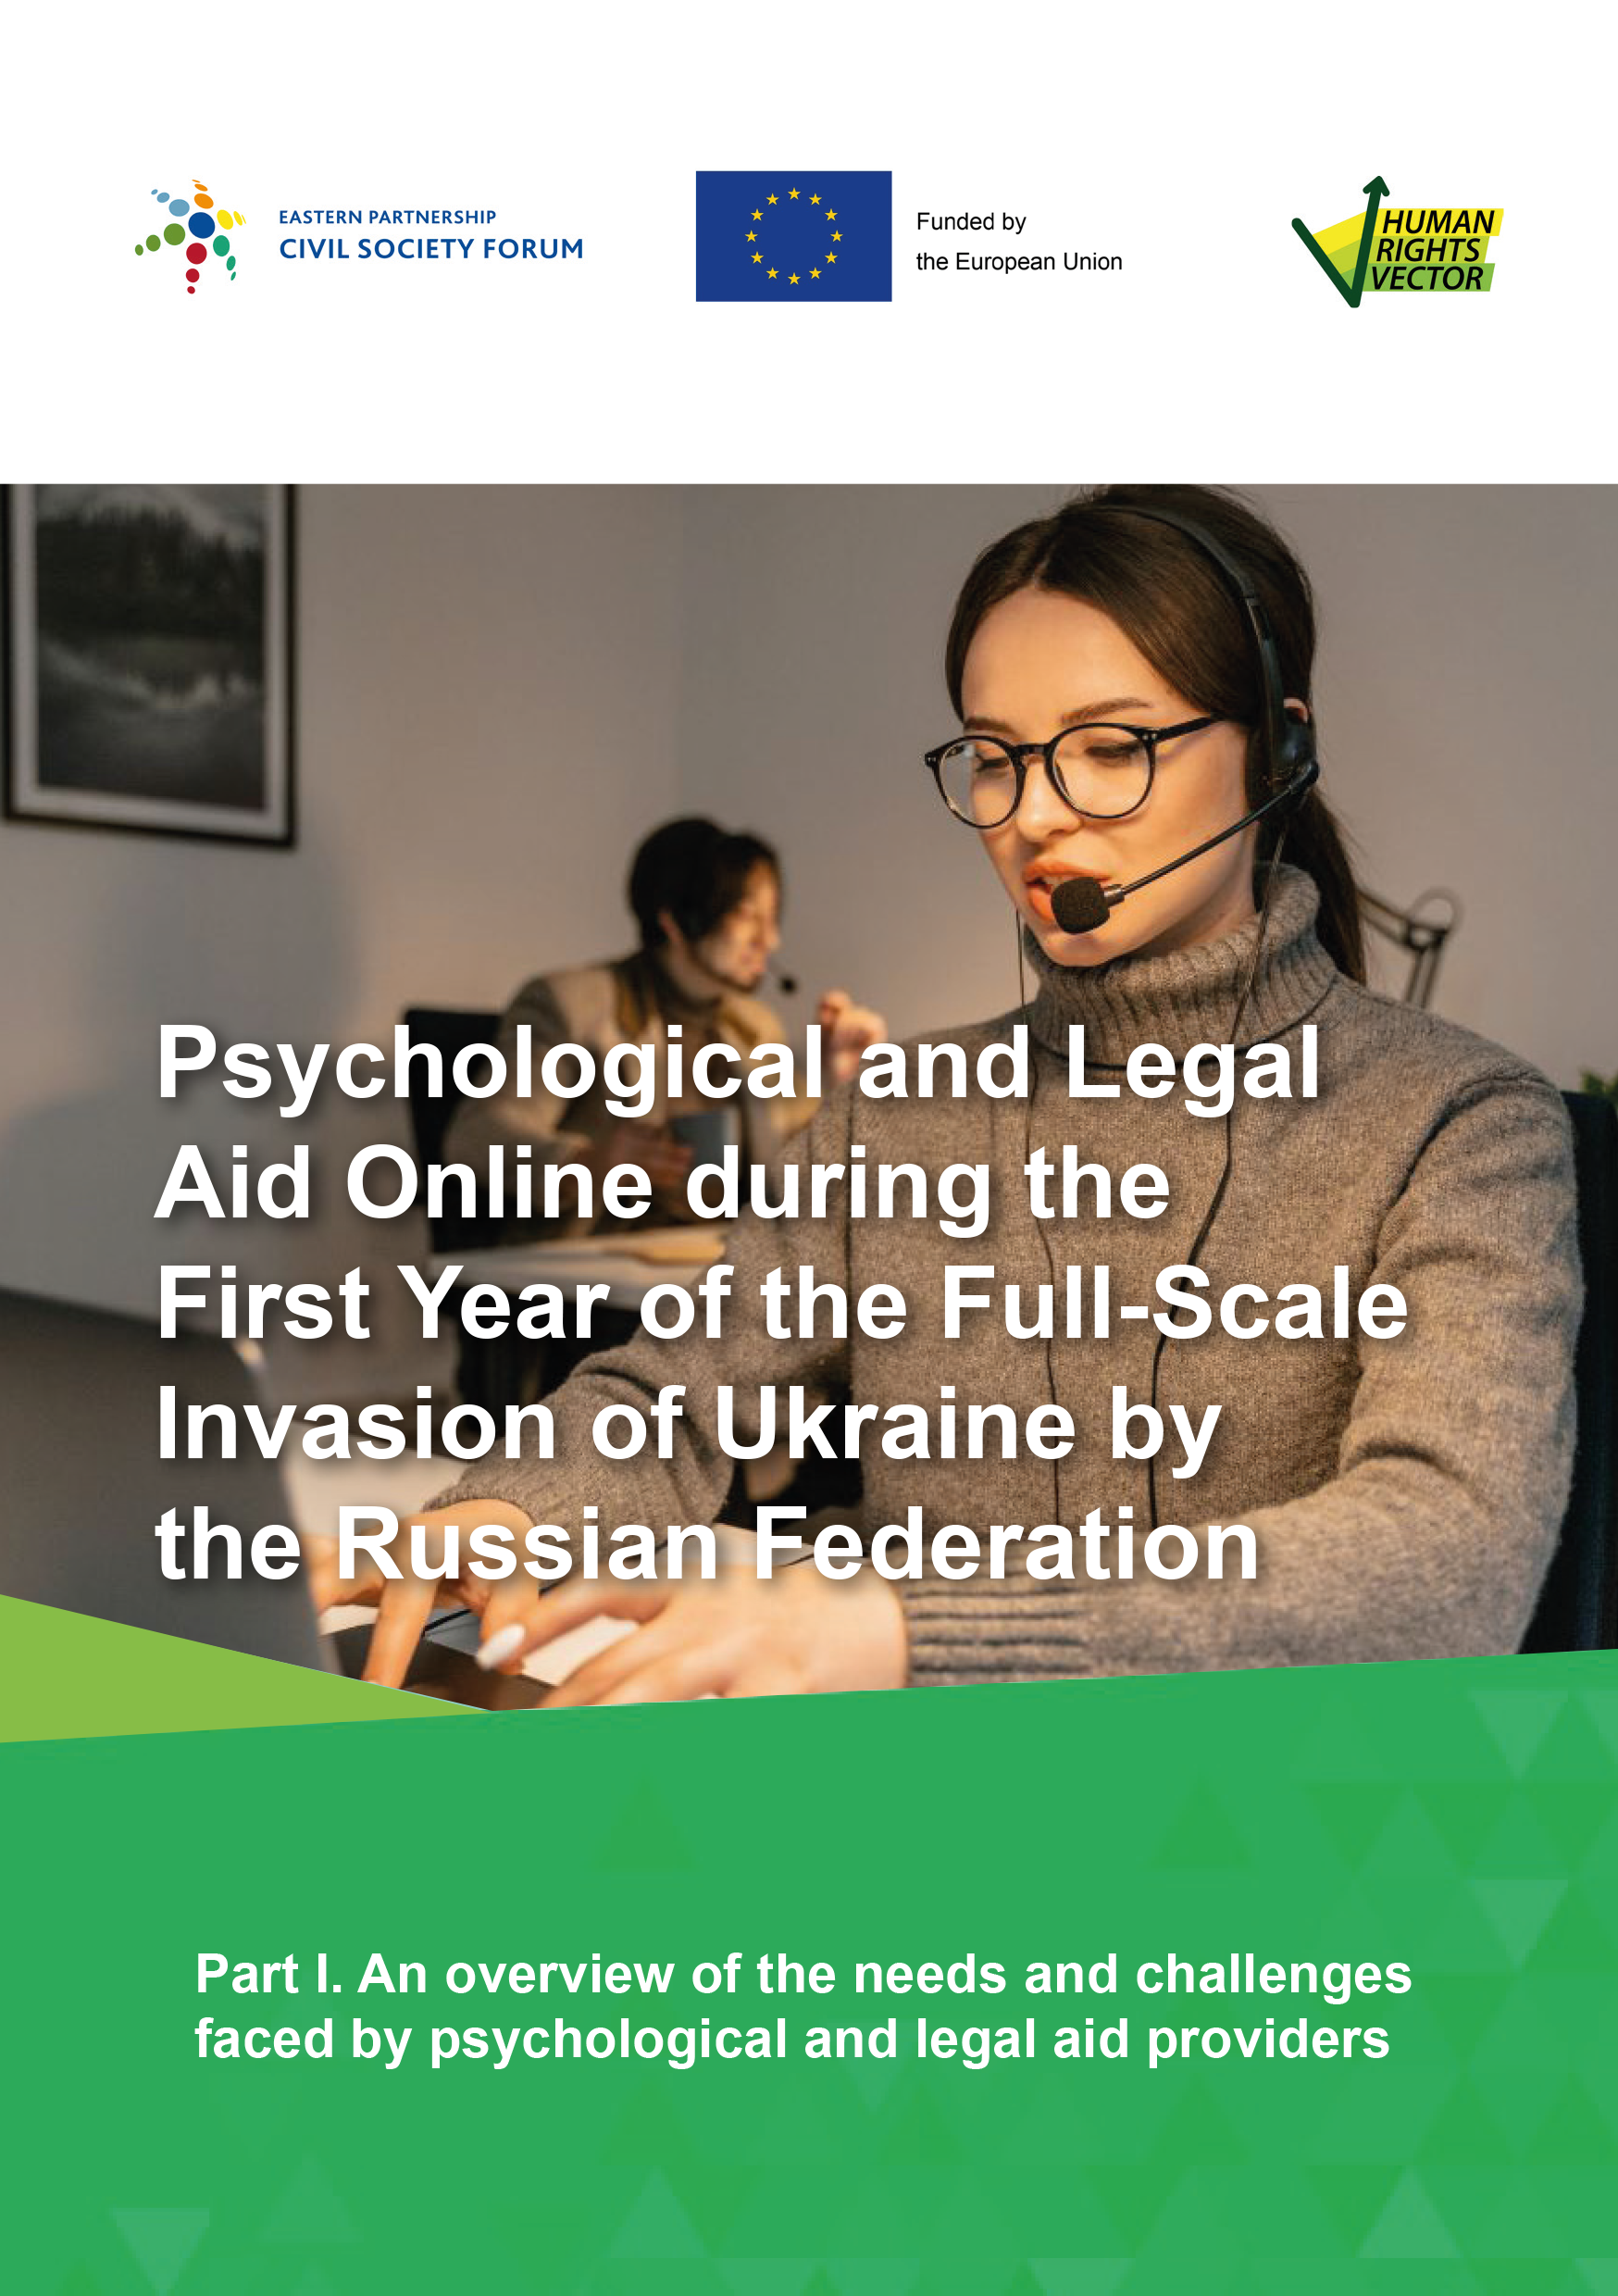 The results of a survey of providers of psychological and legal aid have been published